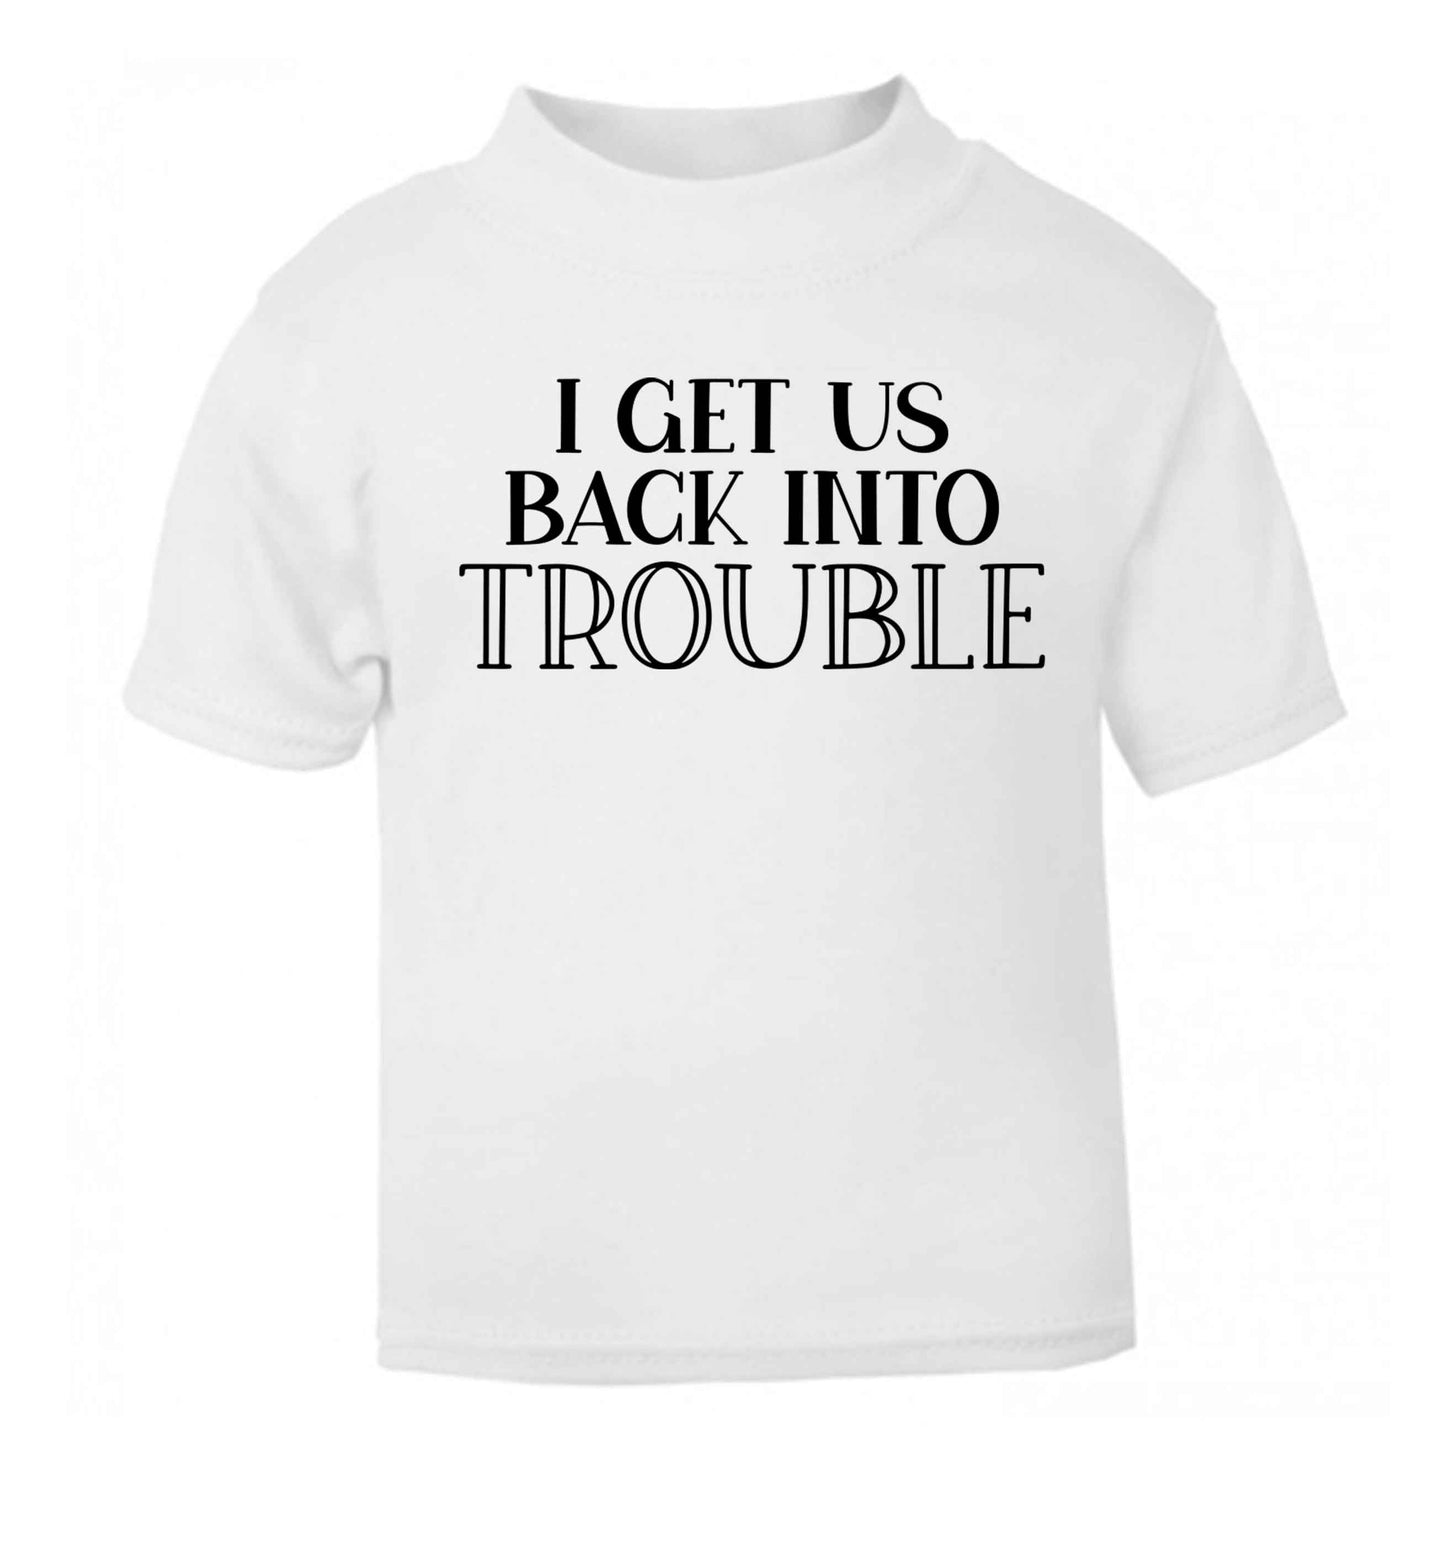 I get us back into trouble white baby toddler Tshirt 2 Years